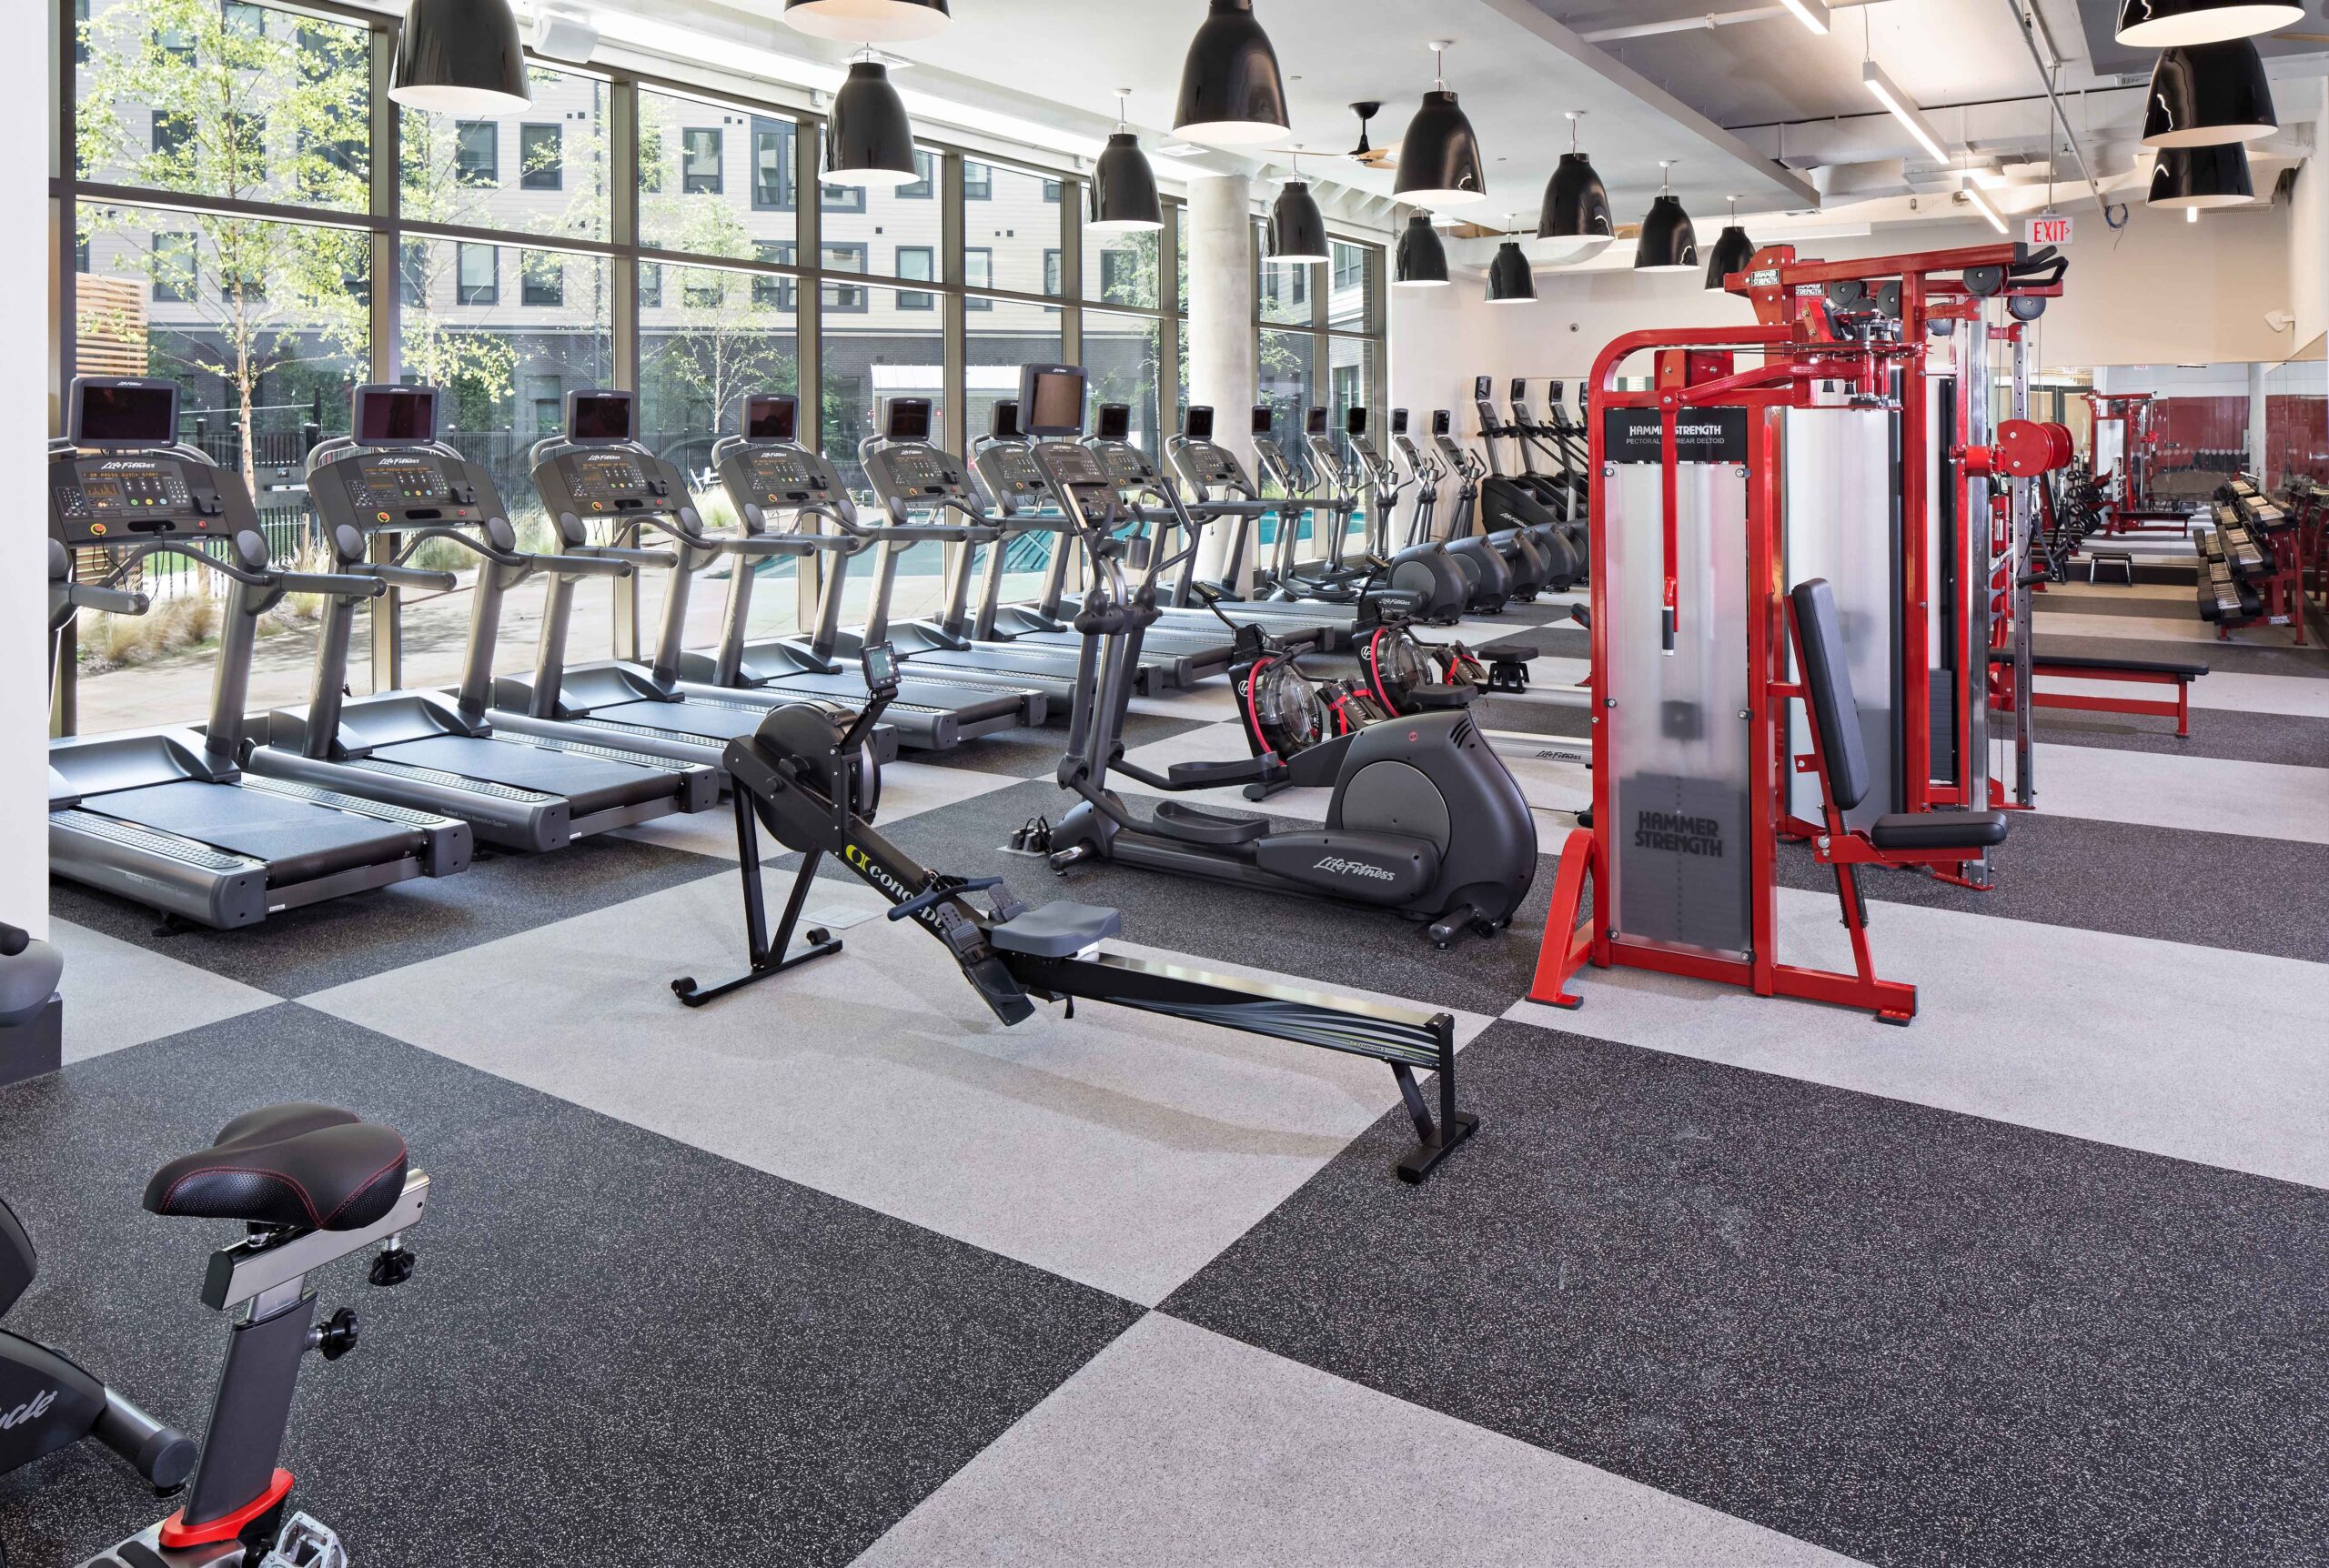 A row of treadmills by the windows and other equipment in the fitness center at Terrapin Row